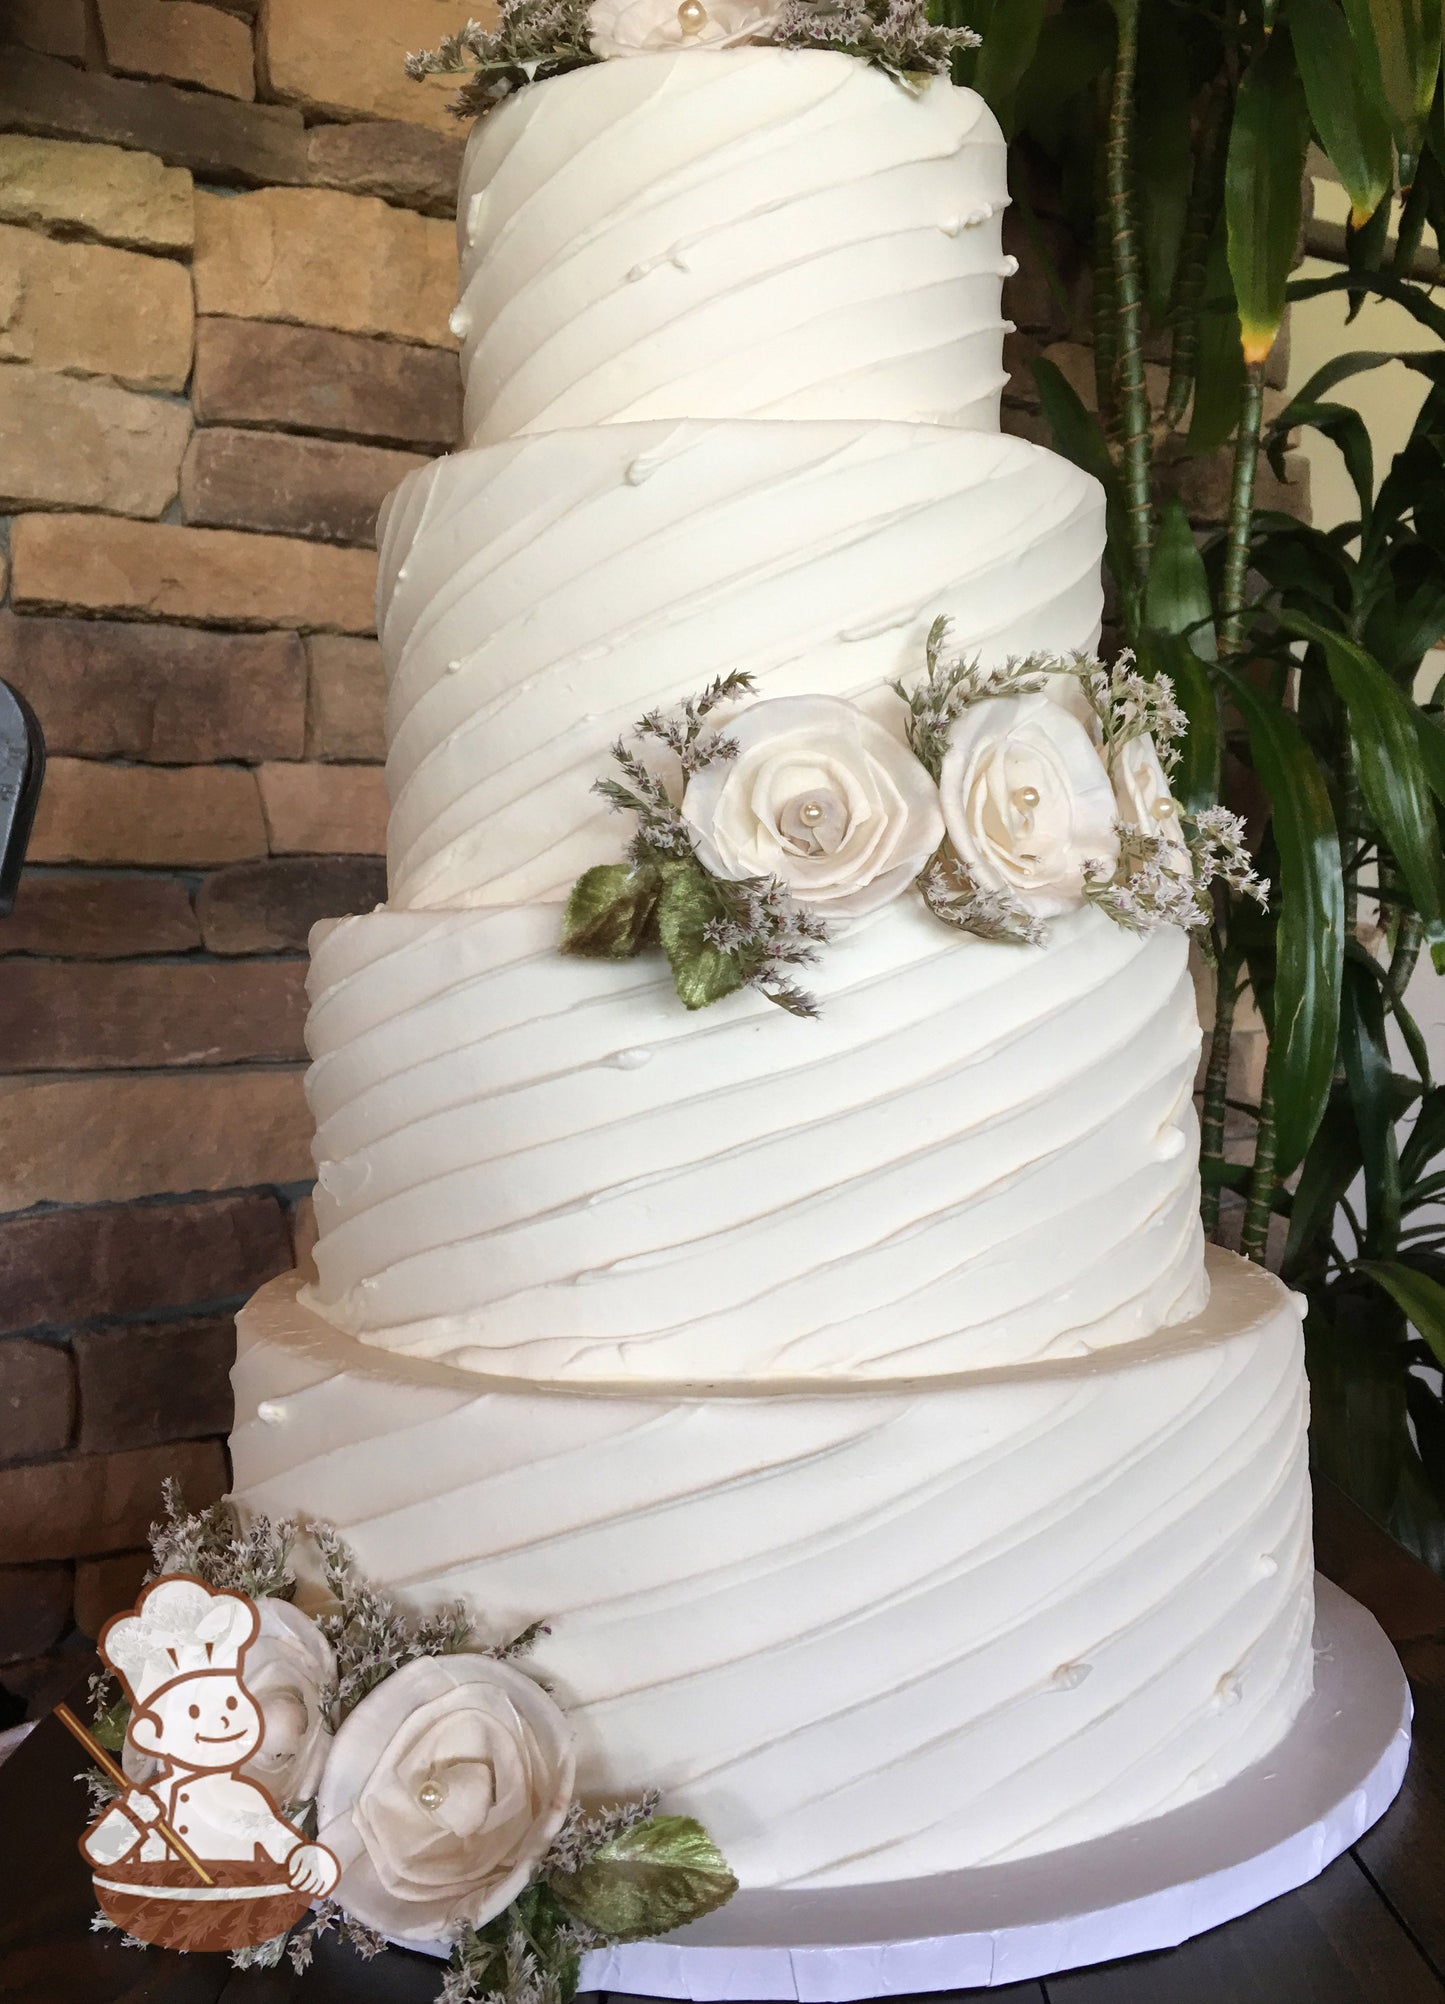 4-tier cake with white icing and decorated with a diagonal angle texture and white flowers.